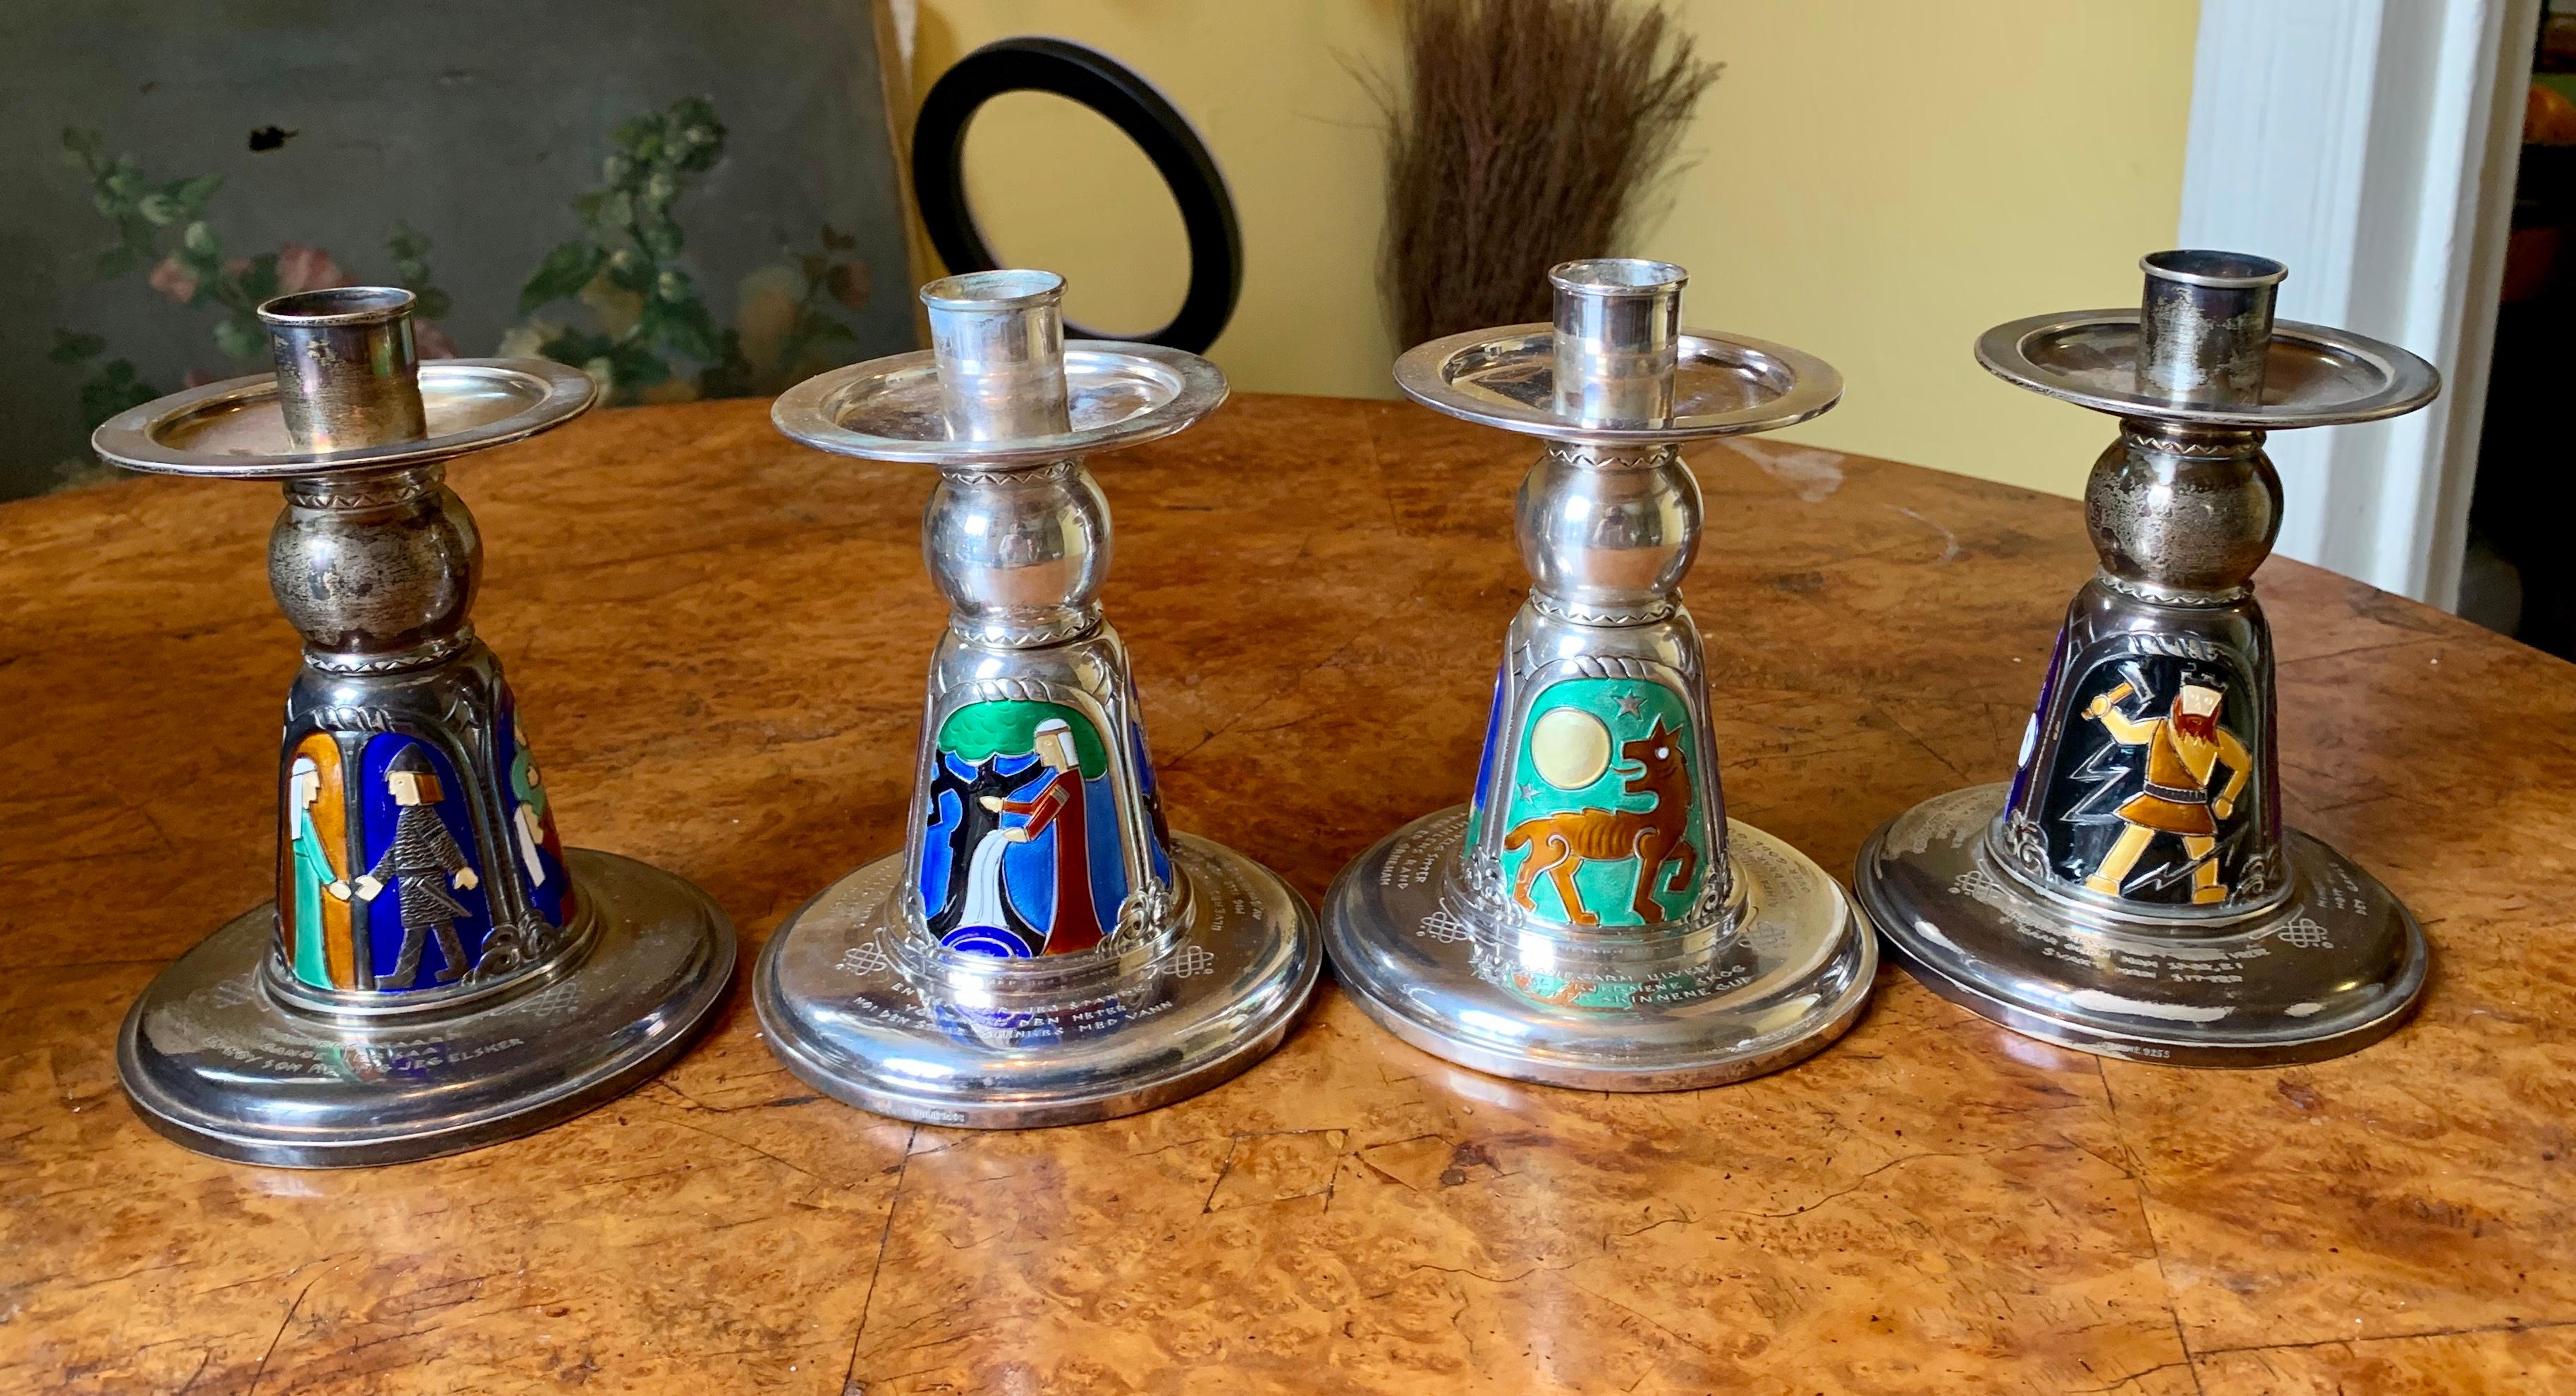 This is a rare museum quality set of Four Norwegian Mid-Century Modernist Enameled Sterling Silver Candlesticks by N.M. Thune of Norway and dating to the 20th century.  Each candlestick is adorned with magnificent enamel images with depictions of